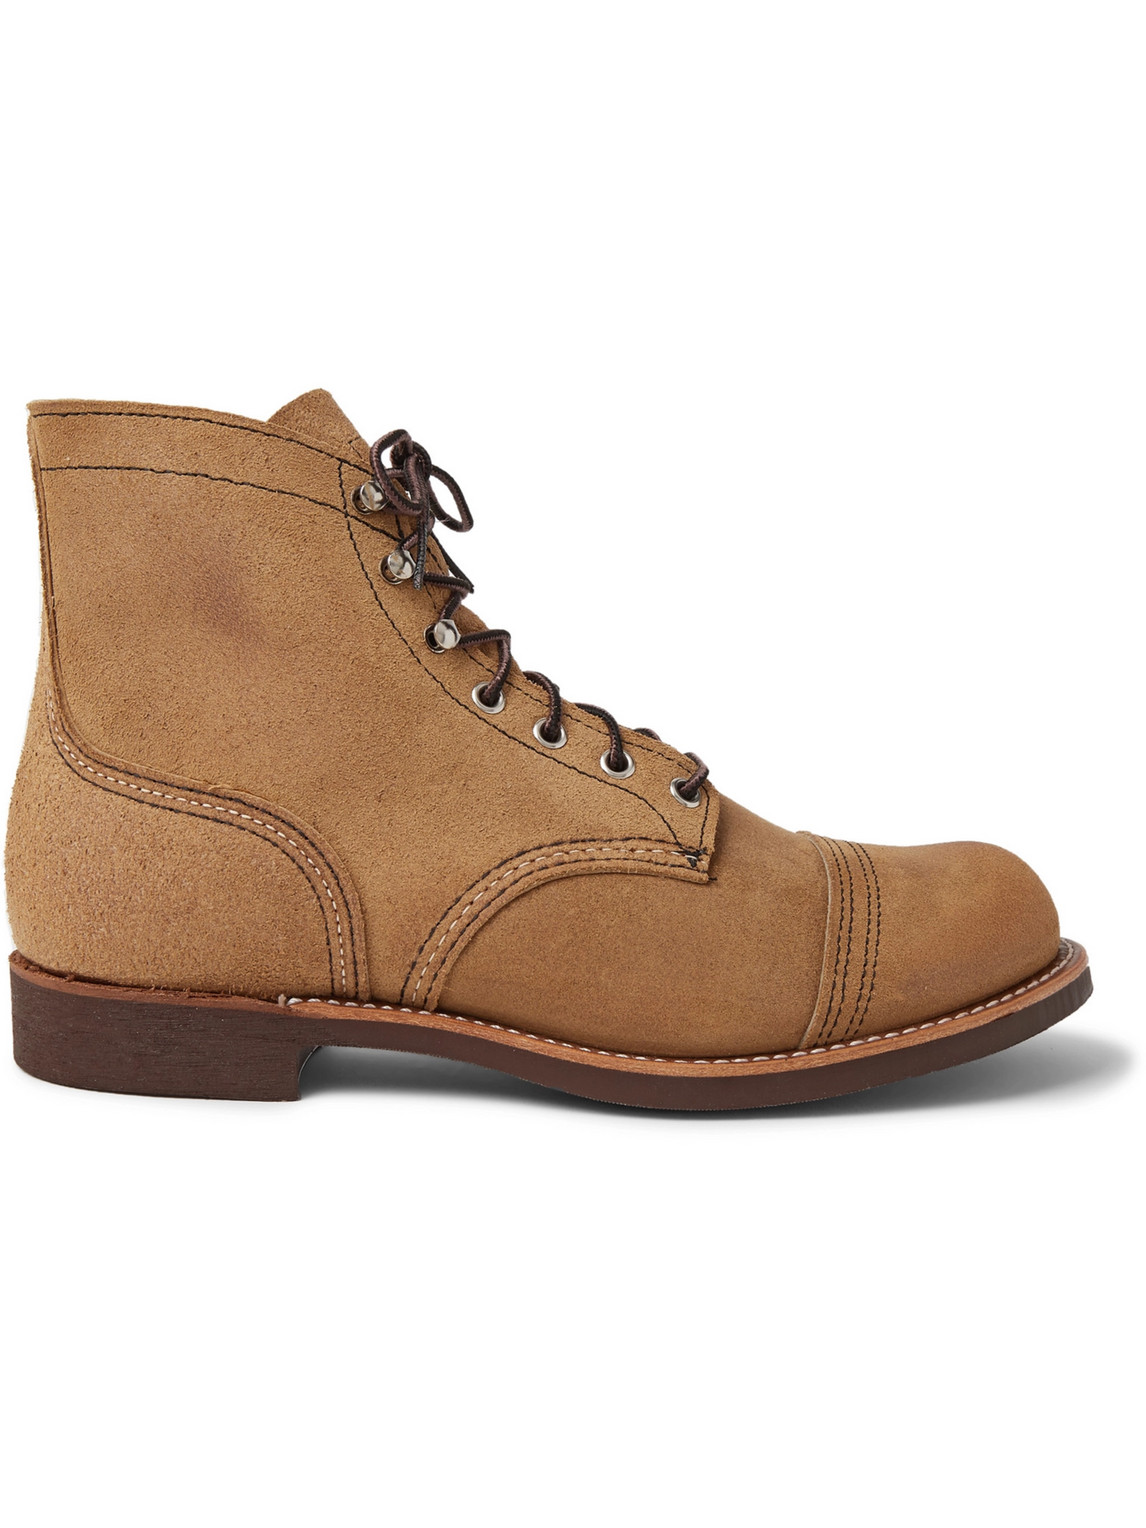 Iron Ranger Roughout Suede Boots